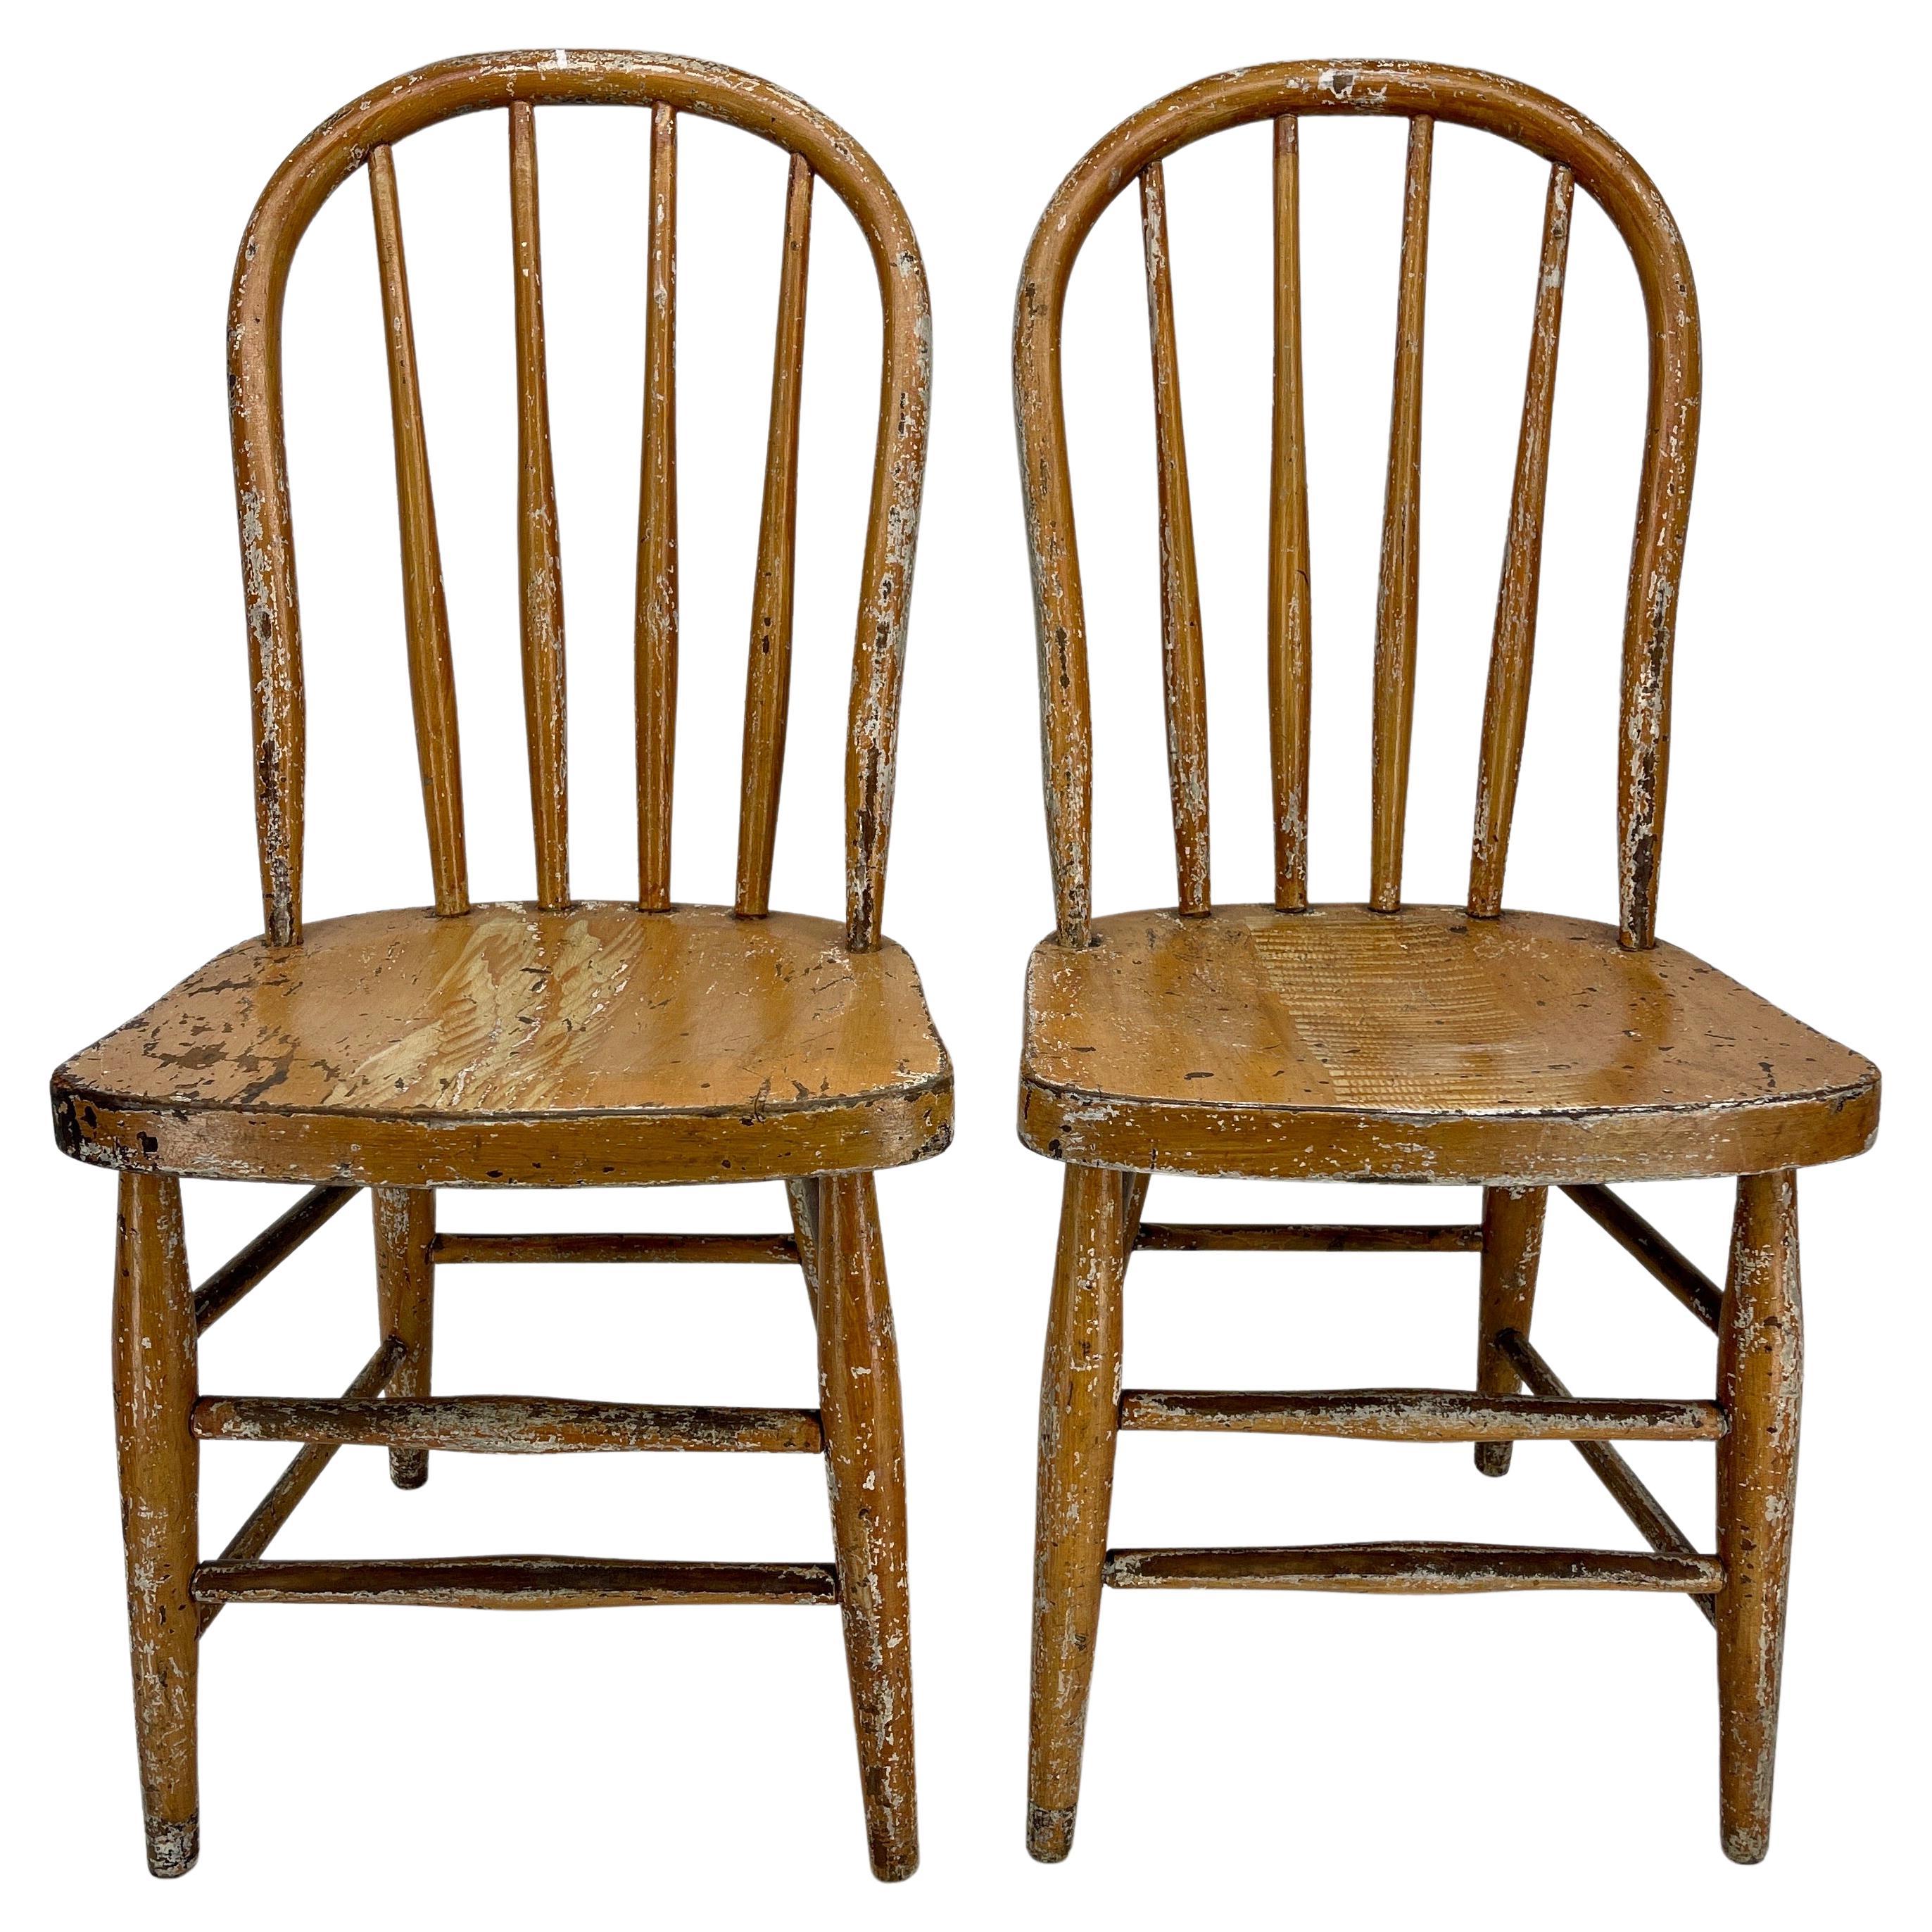 Pair of Small Early Painted Folk Art Chairs or Side Tables